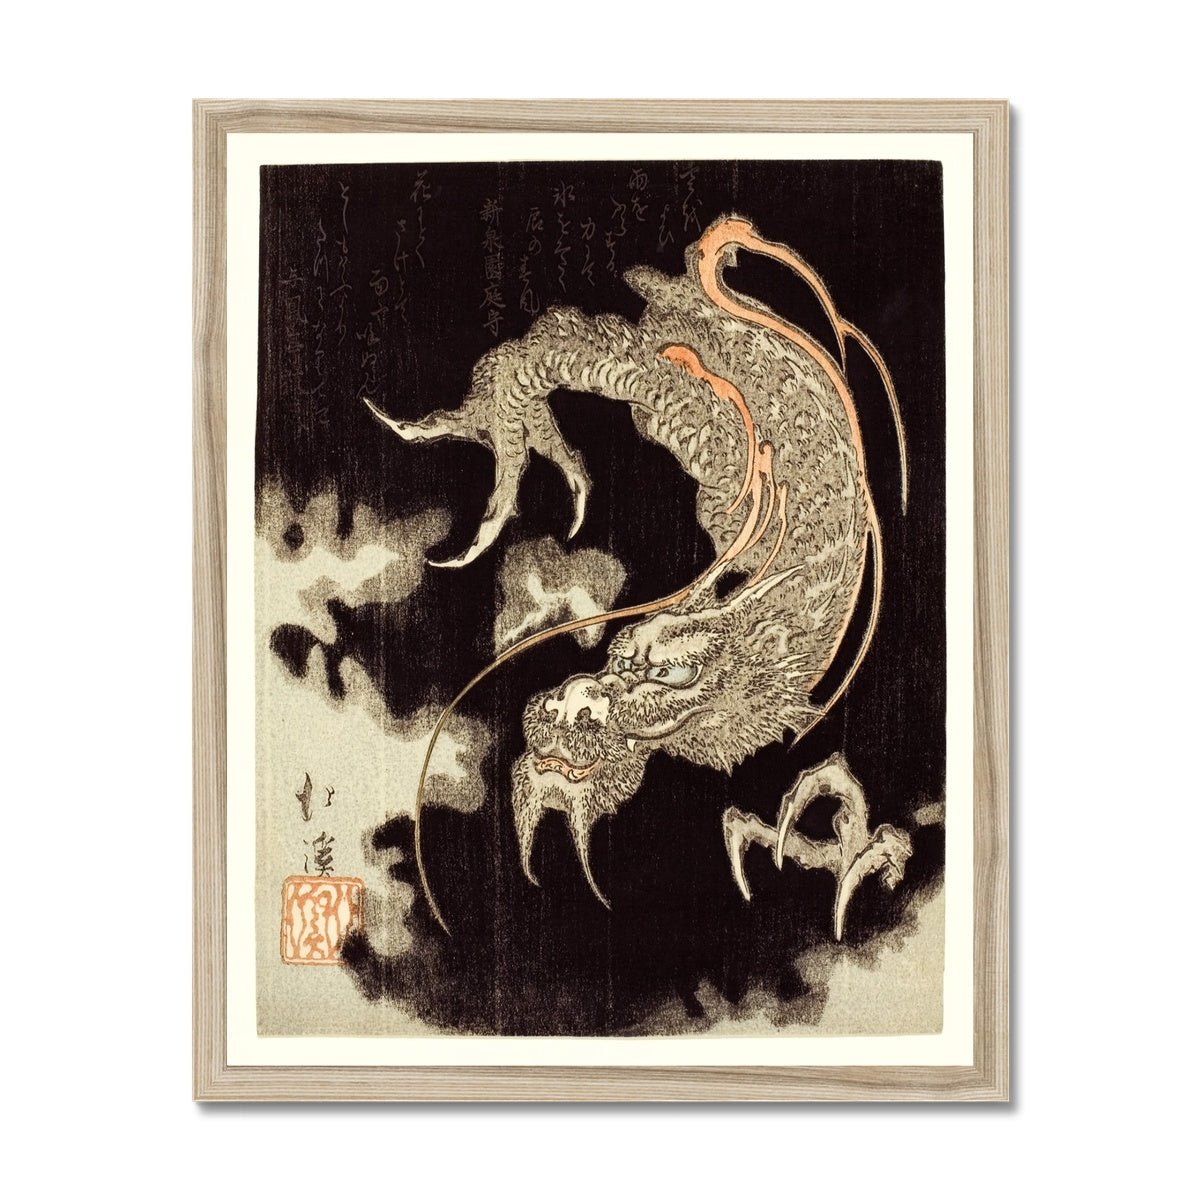 Framed Print 16"x20" / Natural Frame Framed Storm Dragon Against a Black Sky with Clouds and Poems, Totoya Hokkei Japanese Framed Print